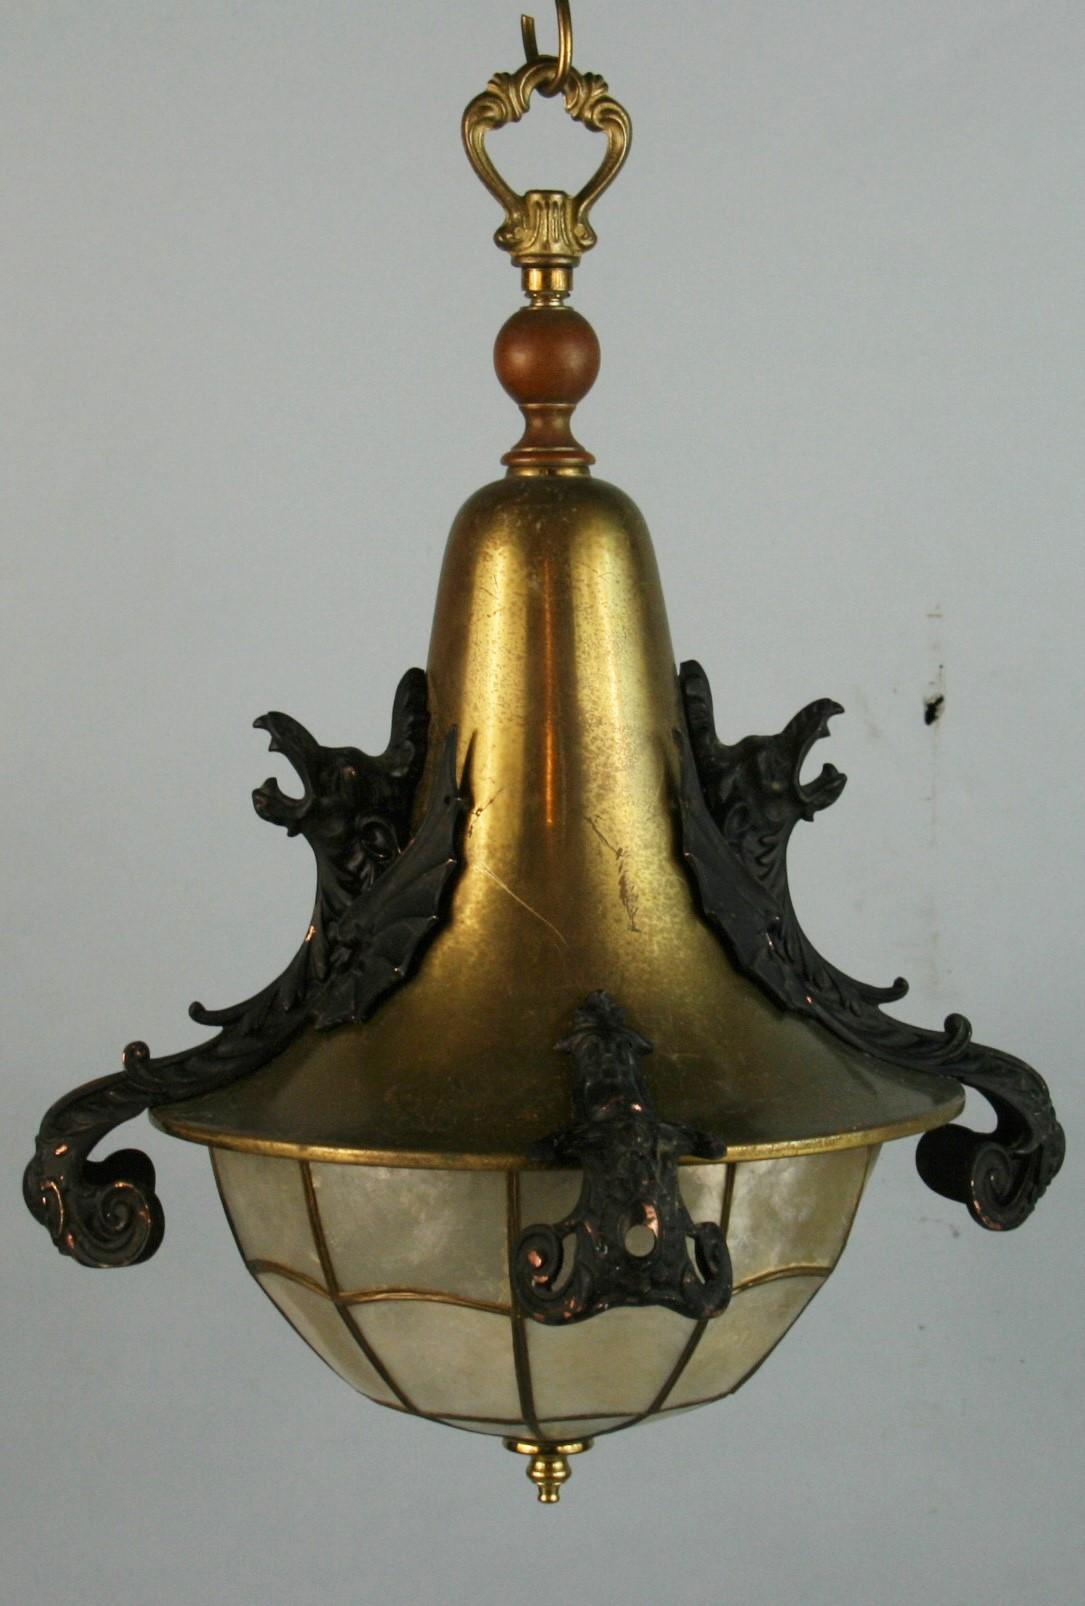 3-788 Antique brass pendant with copper dragon figures with latter added capiz shell shade
Takes 2 60 watt Edison based bulbs
Supplied with 2 feet chain and canopy
Fixture dimensions 17 